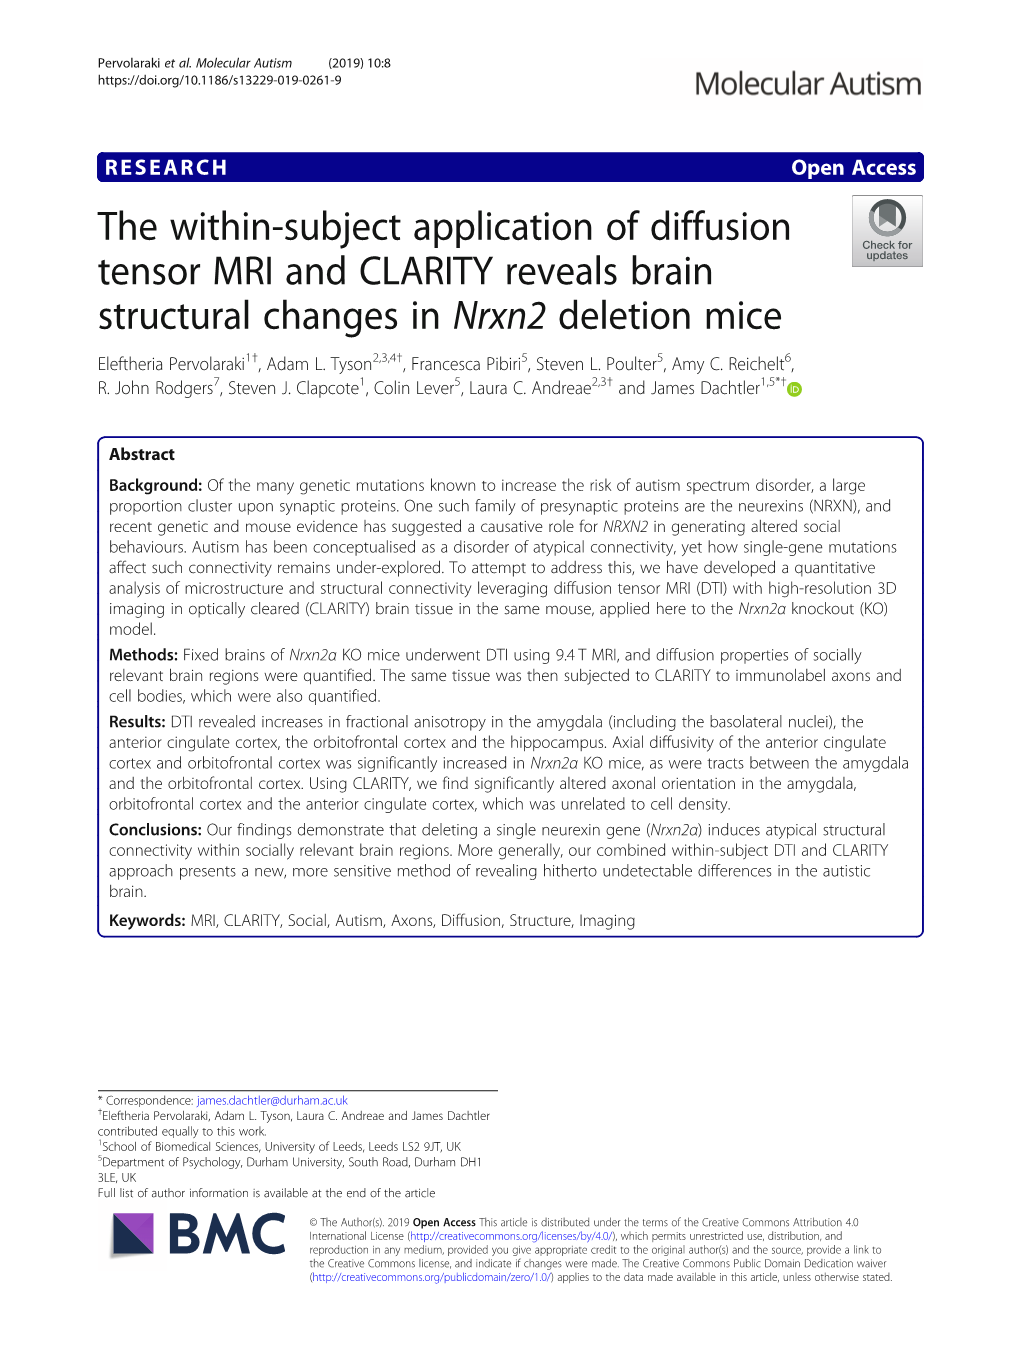 The Within-Subject Application of Diffusion Tensor MRI and CLARITY Reveals Brain Structural Changes in Nrxn2 Deletion Mice Eleftheria Pervolaraki1†, Adam L